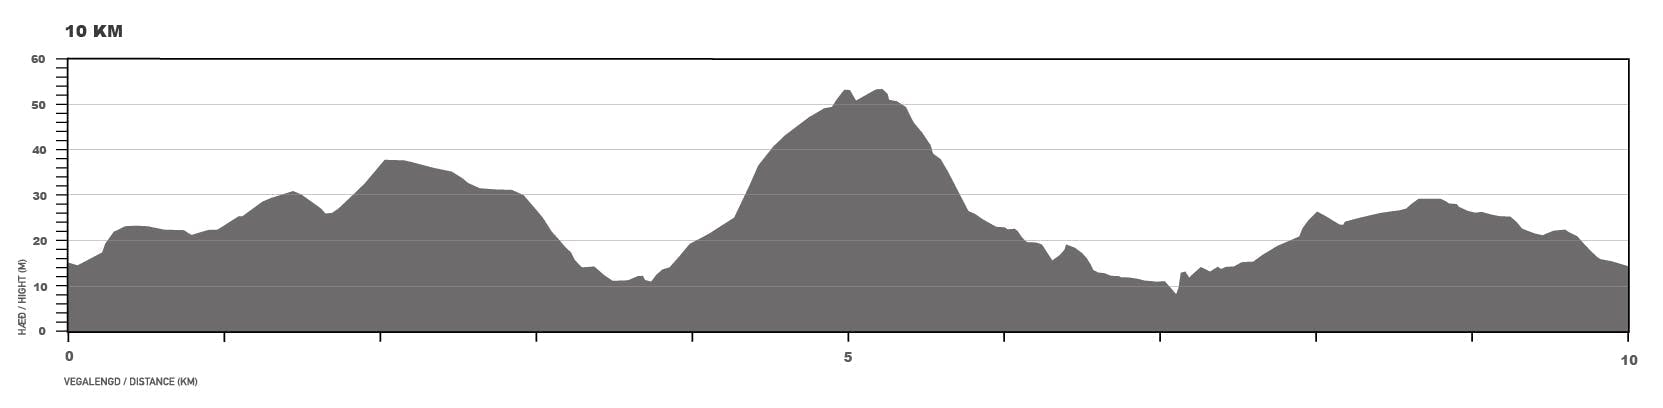 Elevation map for the 5 km race.